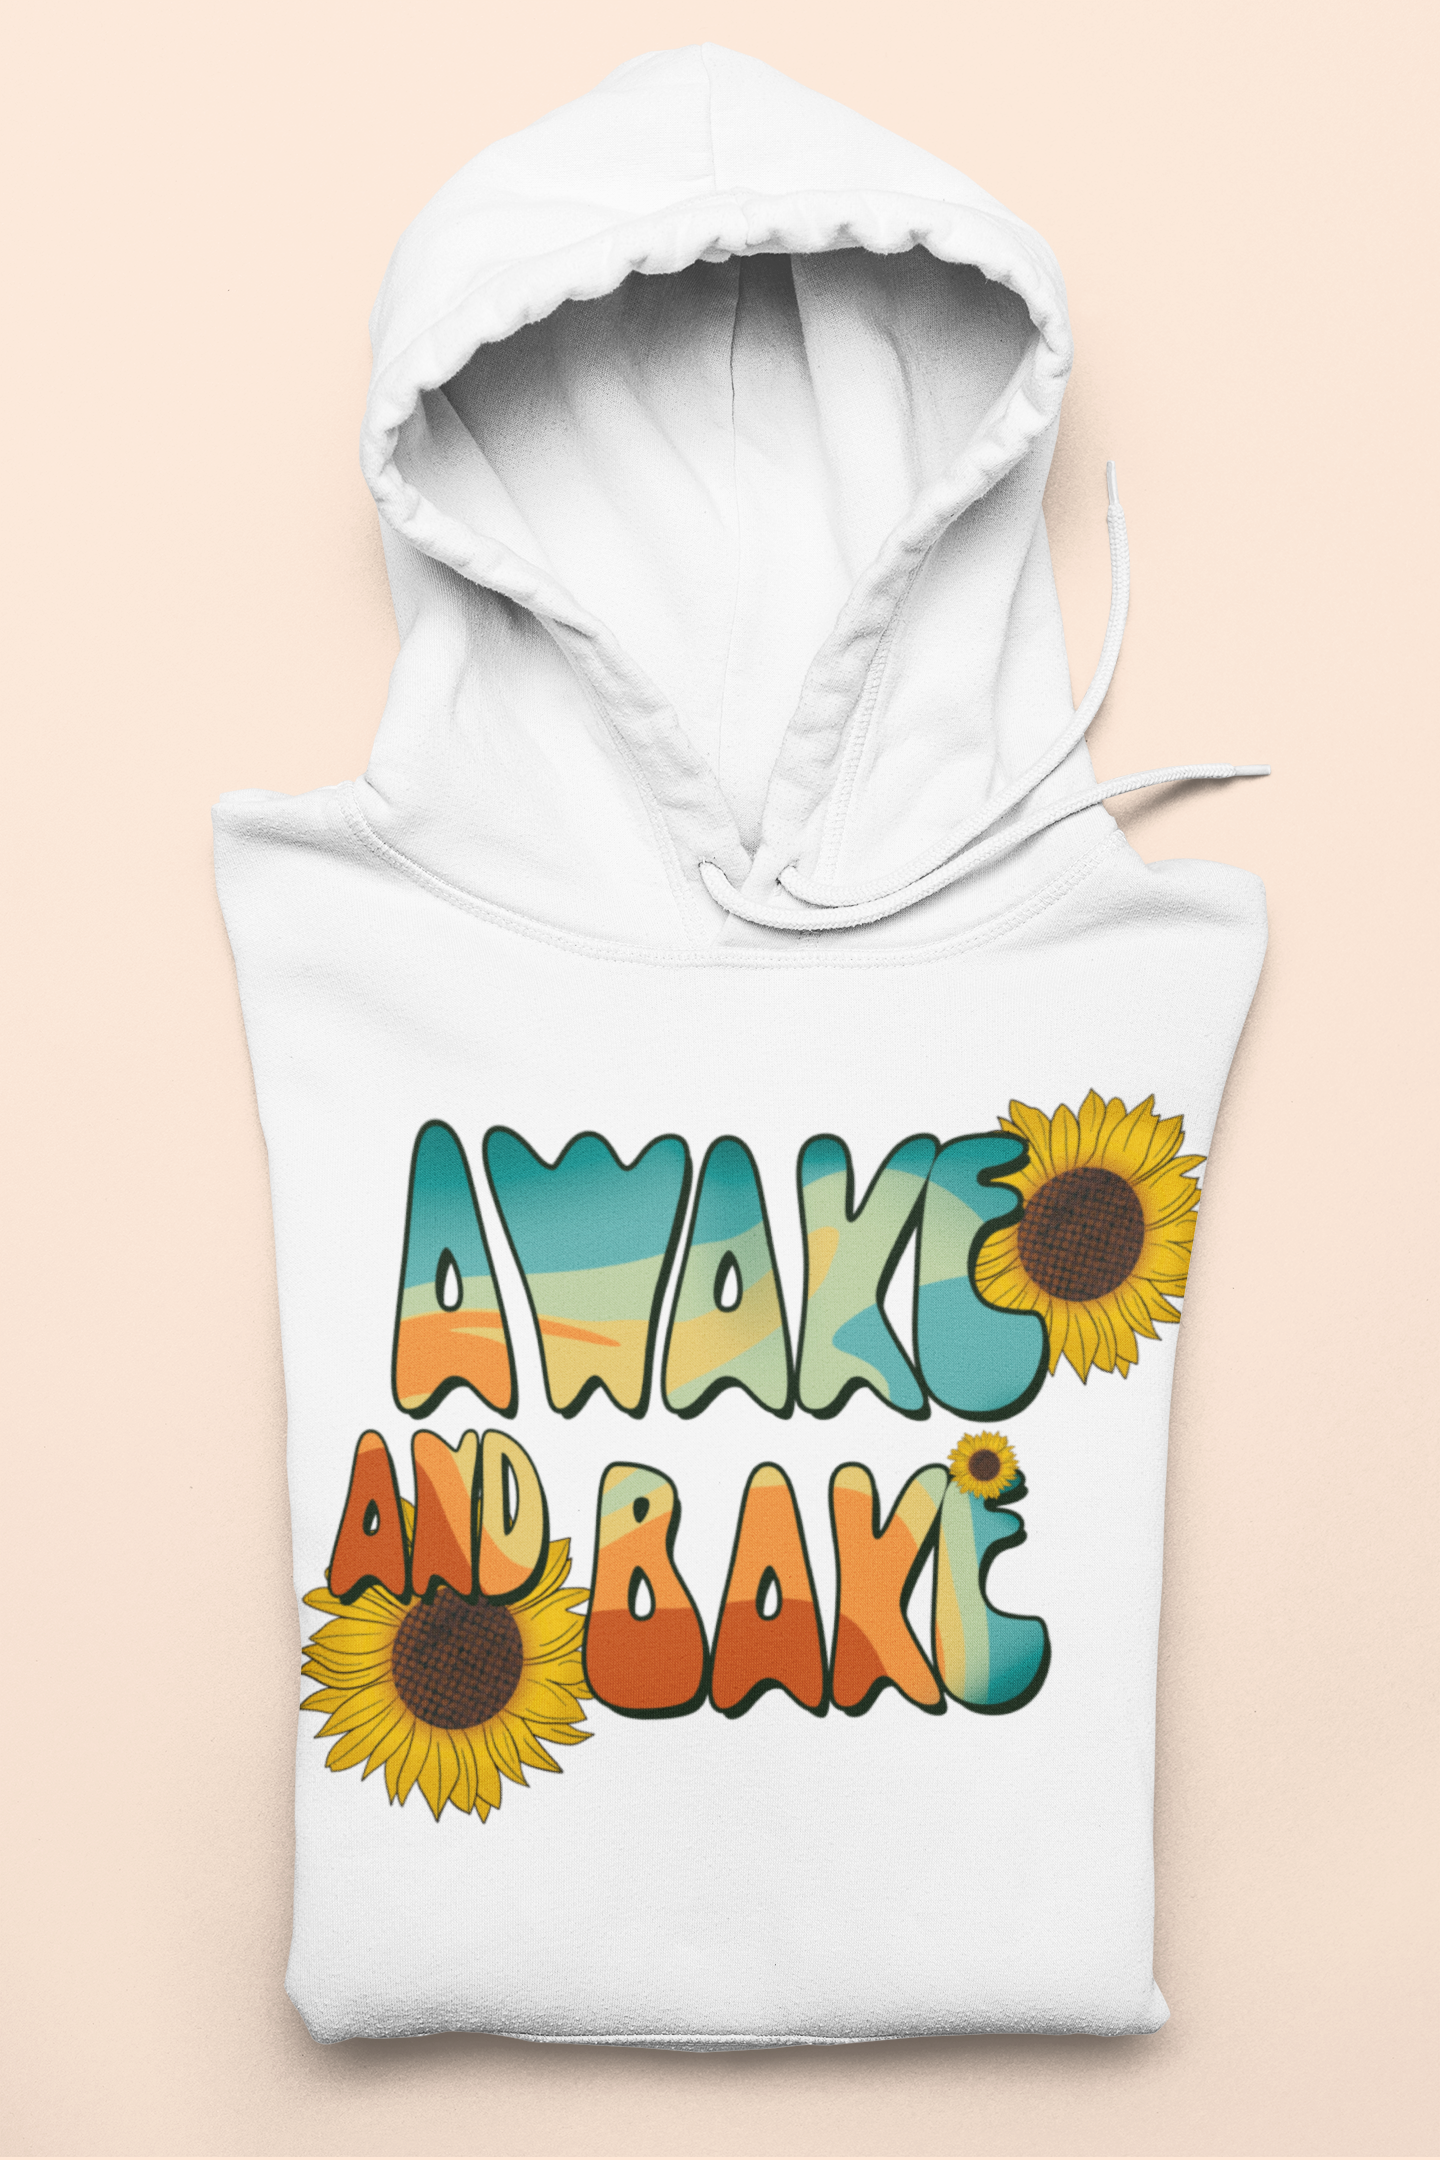 stoner hoodie with a sunflower that says awake and bake - HighCiti